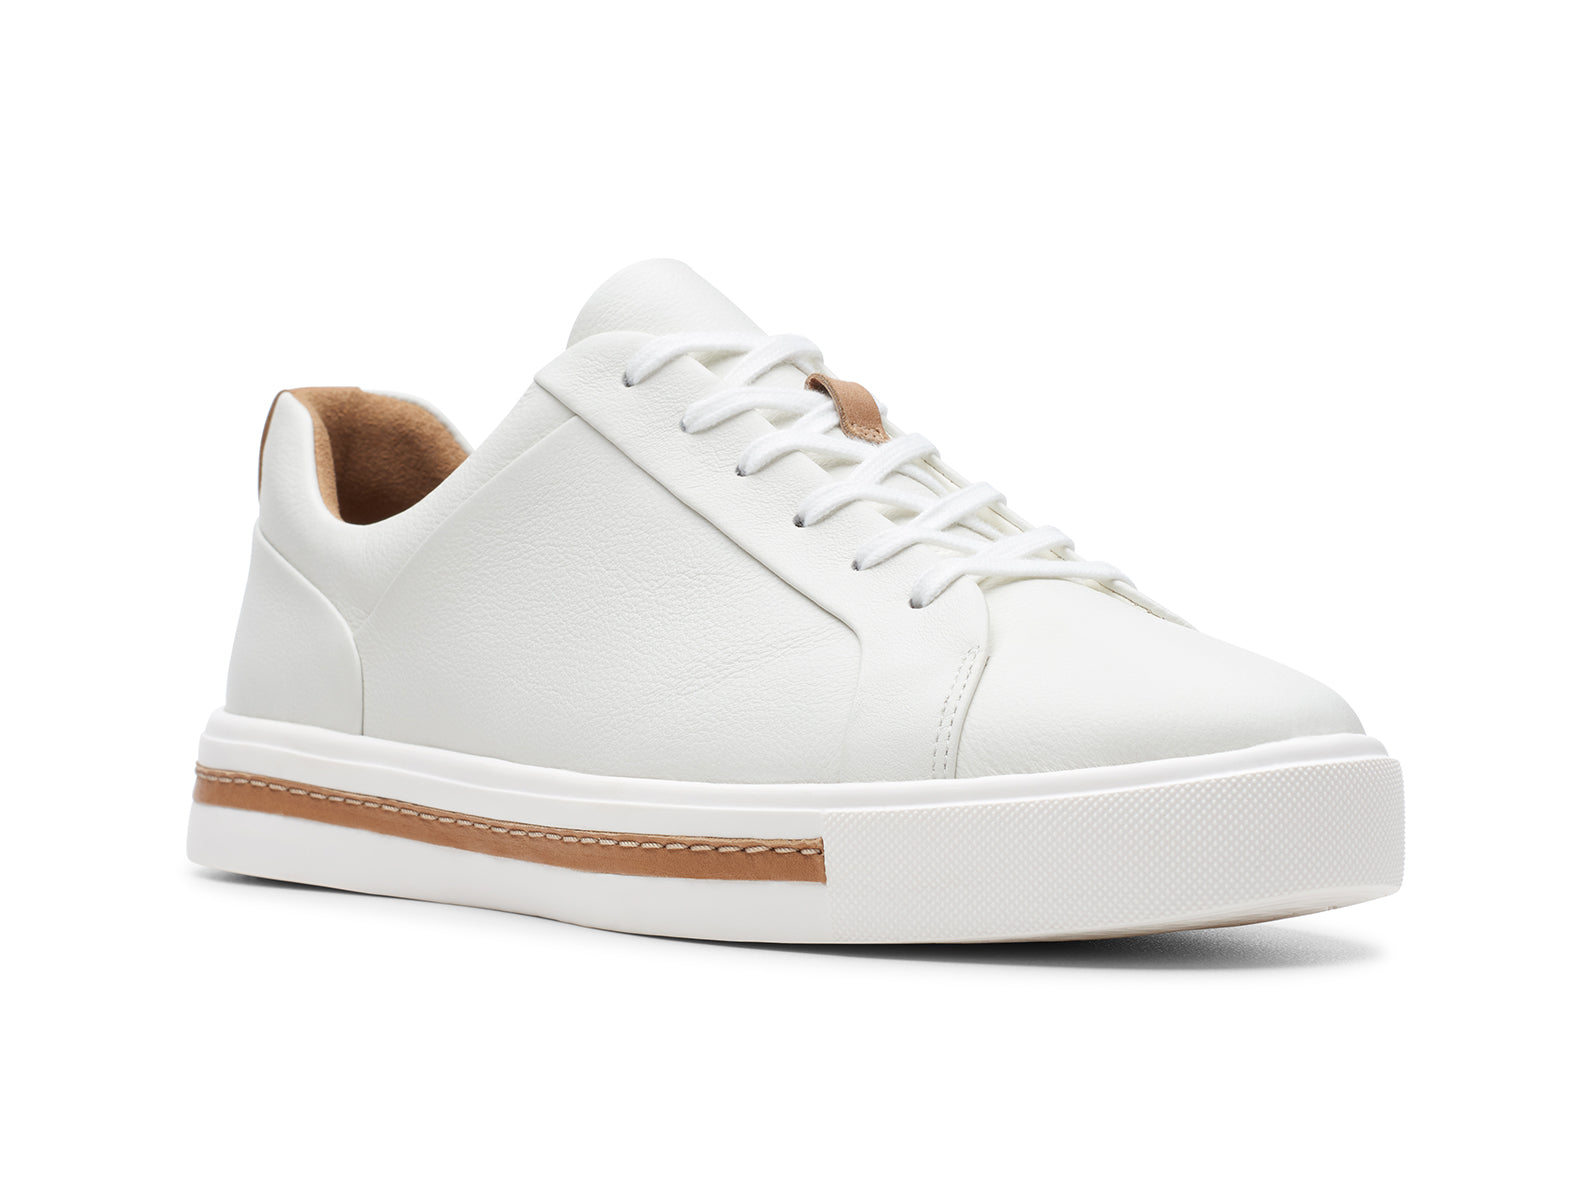 Carks Un Maui Lace | White | Ladies Shoes at Walsh Brothers Shoes